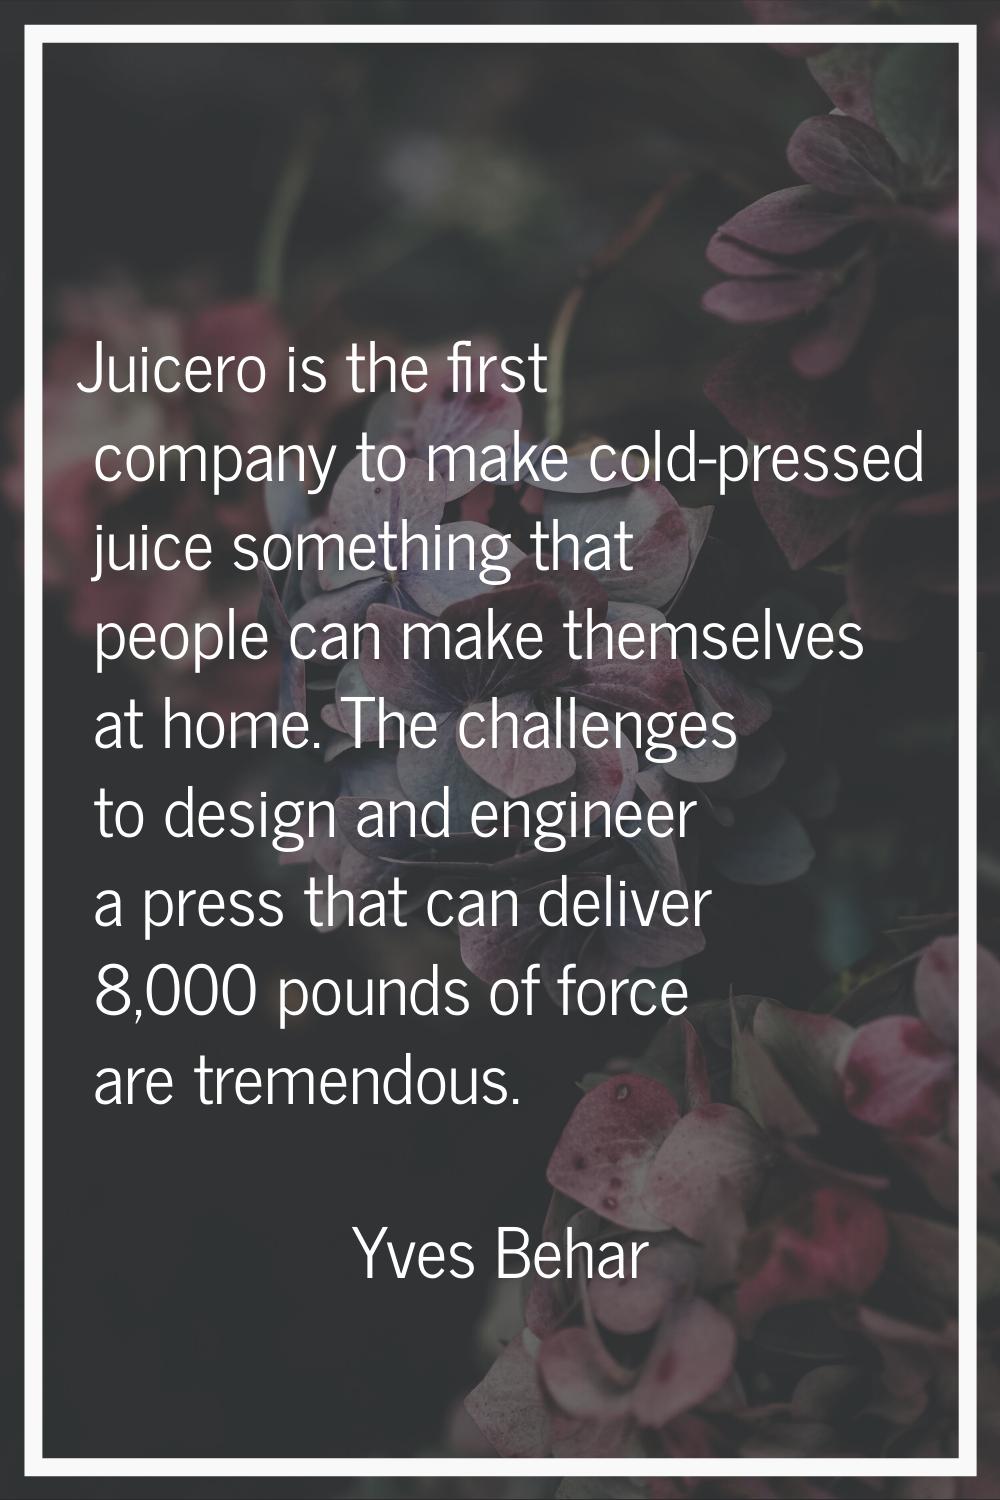 Juicero is the first company to make cold-pressed juice something that people can make themselves a